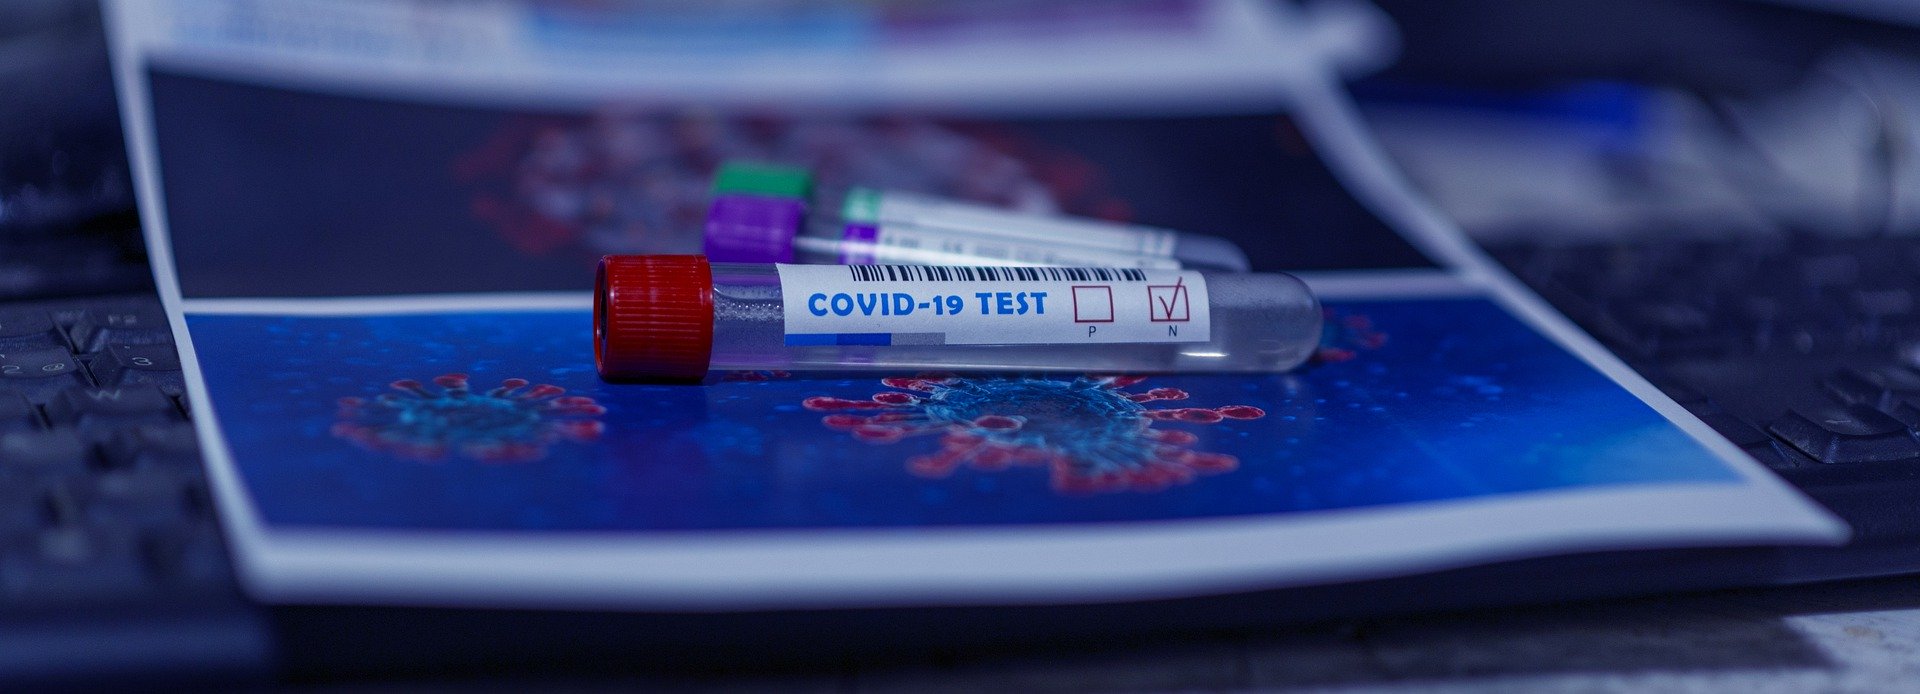 Two Indonesian companies, Kimia Farma and Indo Farma, have agreed to collaborate with G42 Health Care AI Holding Rsc Ltd. of the United Arab Emirates (UAE), in the development of the COVID-19 vaccine and technology to detect the novel coronavirus infections.